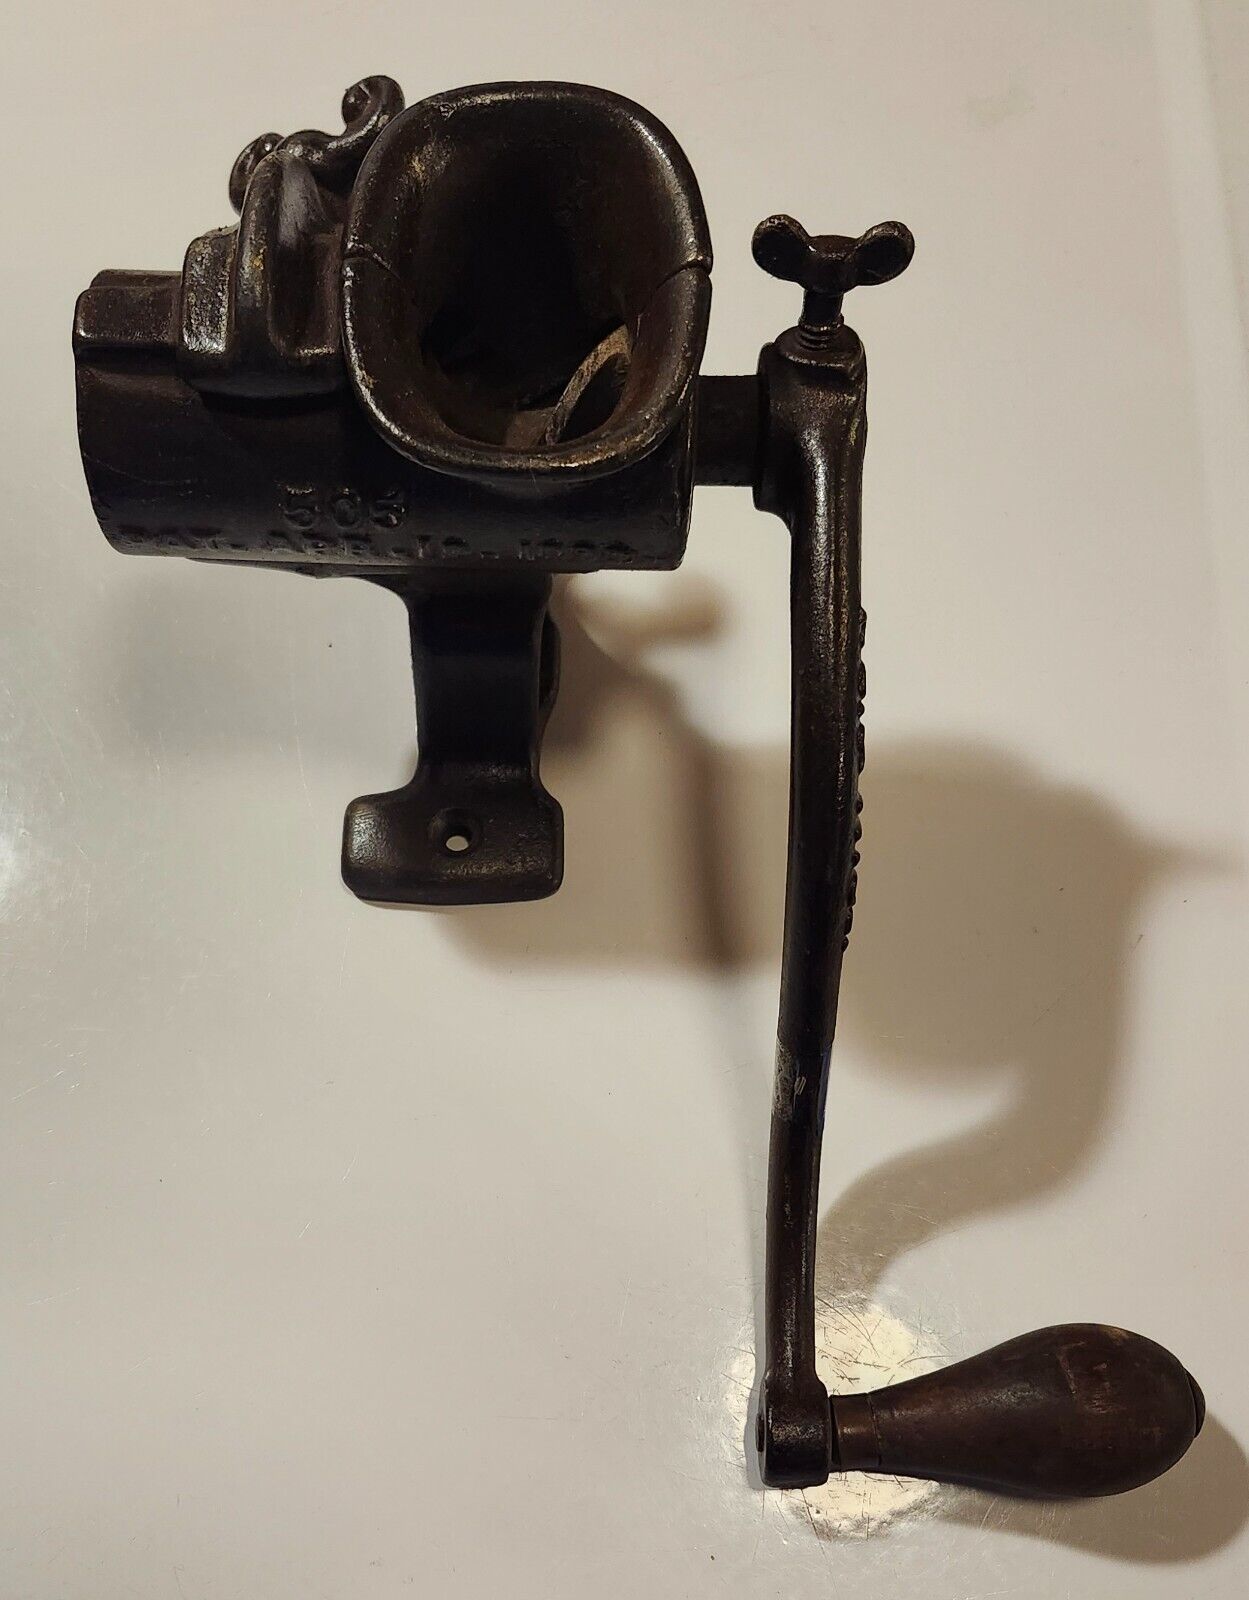 1892 PATENT ANTIQUE P.S.&W. CO. CAST IRON MEAT GRINDER WITH WOOD HANDLE #505